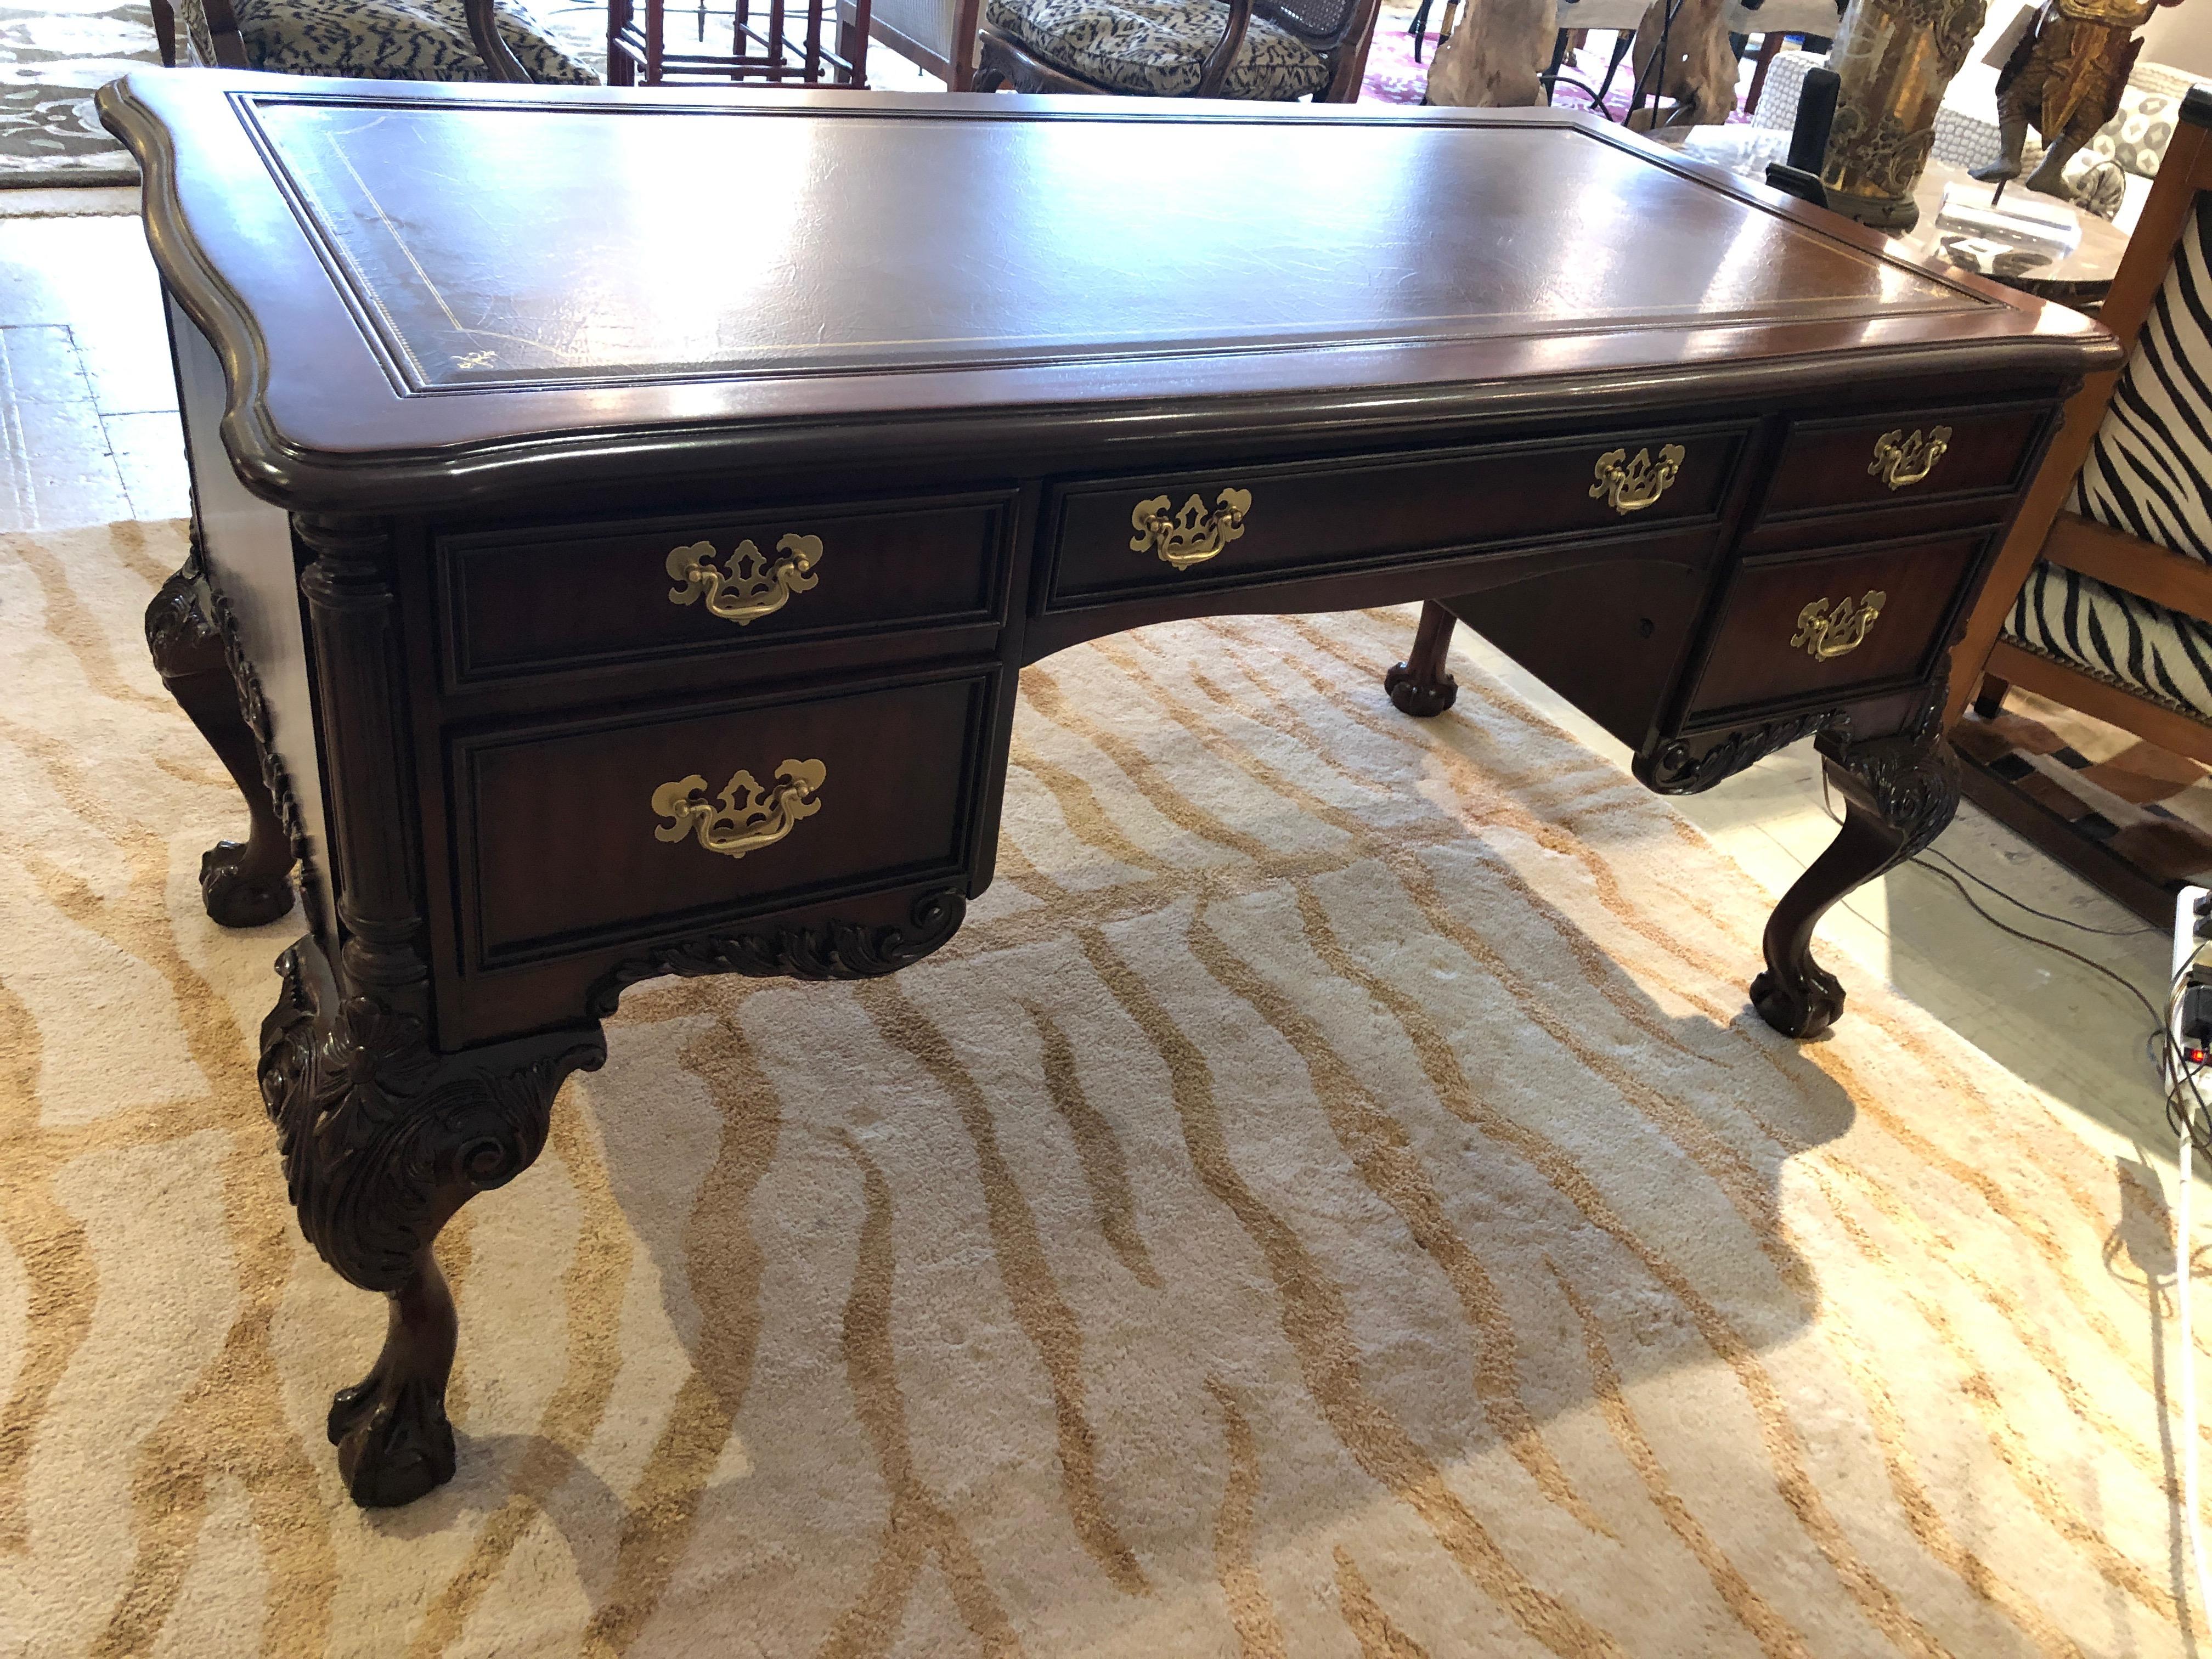 A luxurious carved mahogany executive desk having brown tooled leather top with gilded decoration, 4 smoothly operating drawers including one on the bottom right for hanging files. The ornate cabriole legs with ball and claw feet are especially